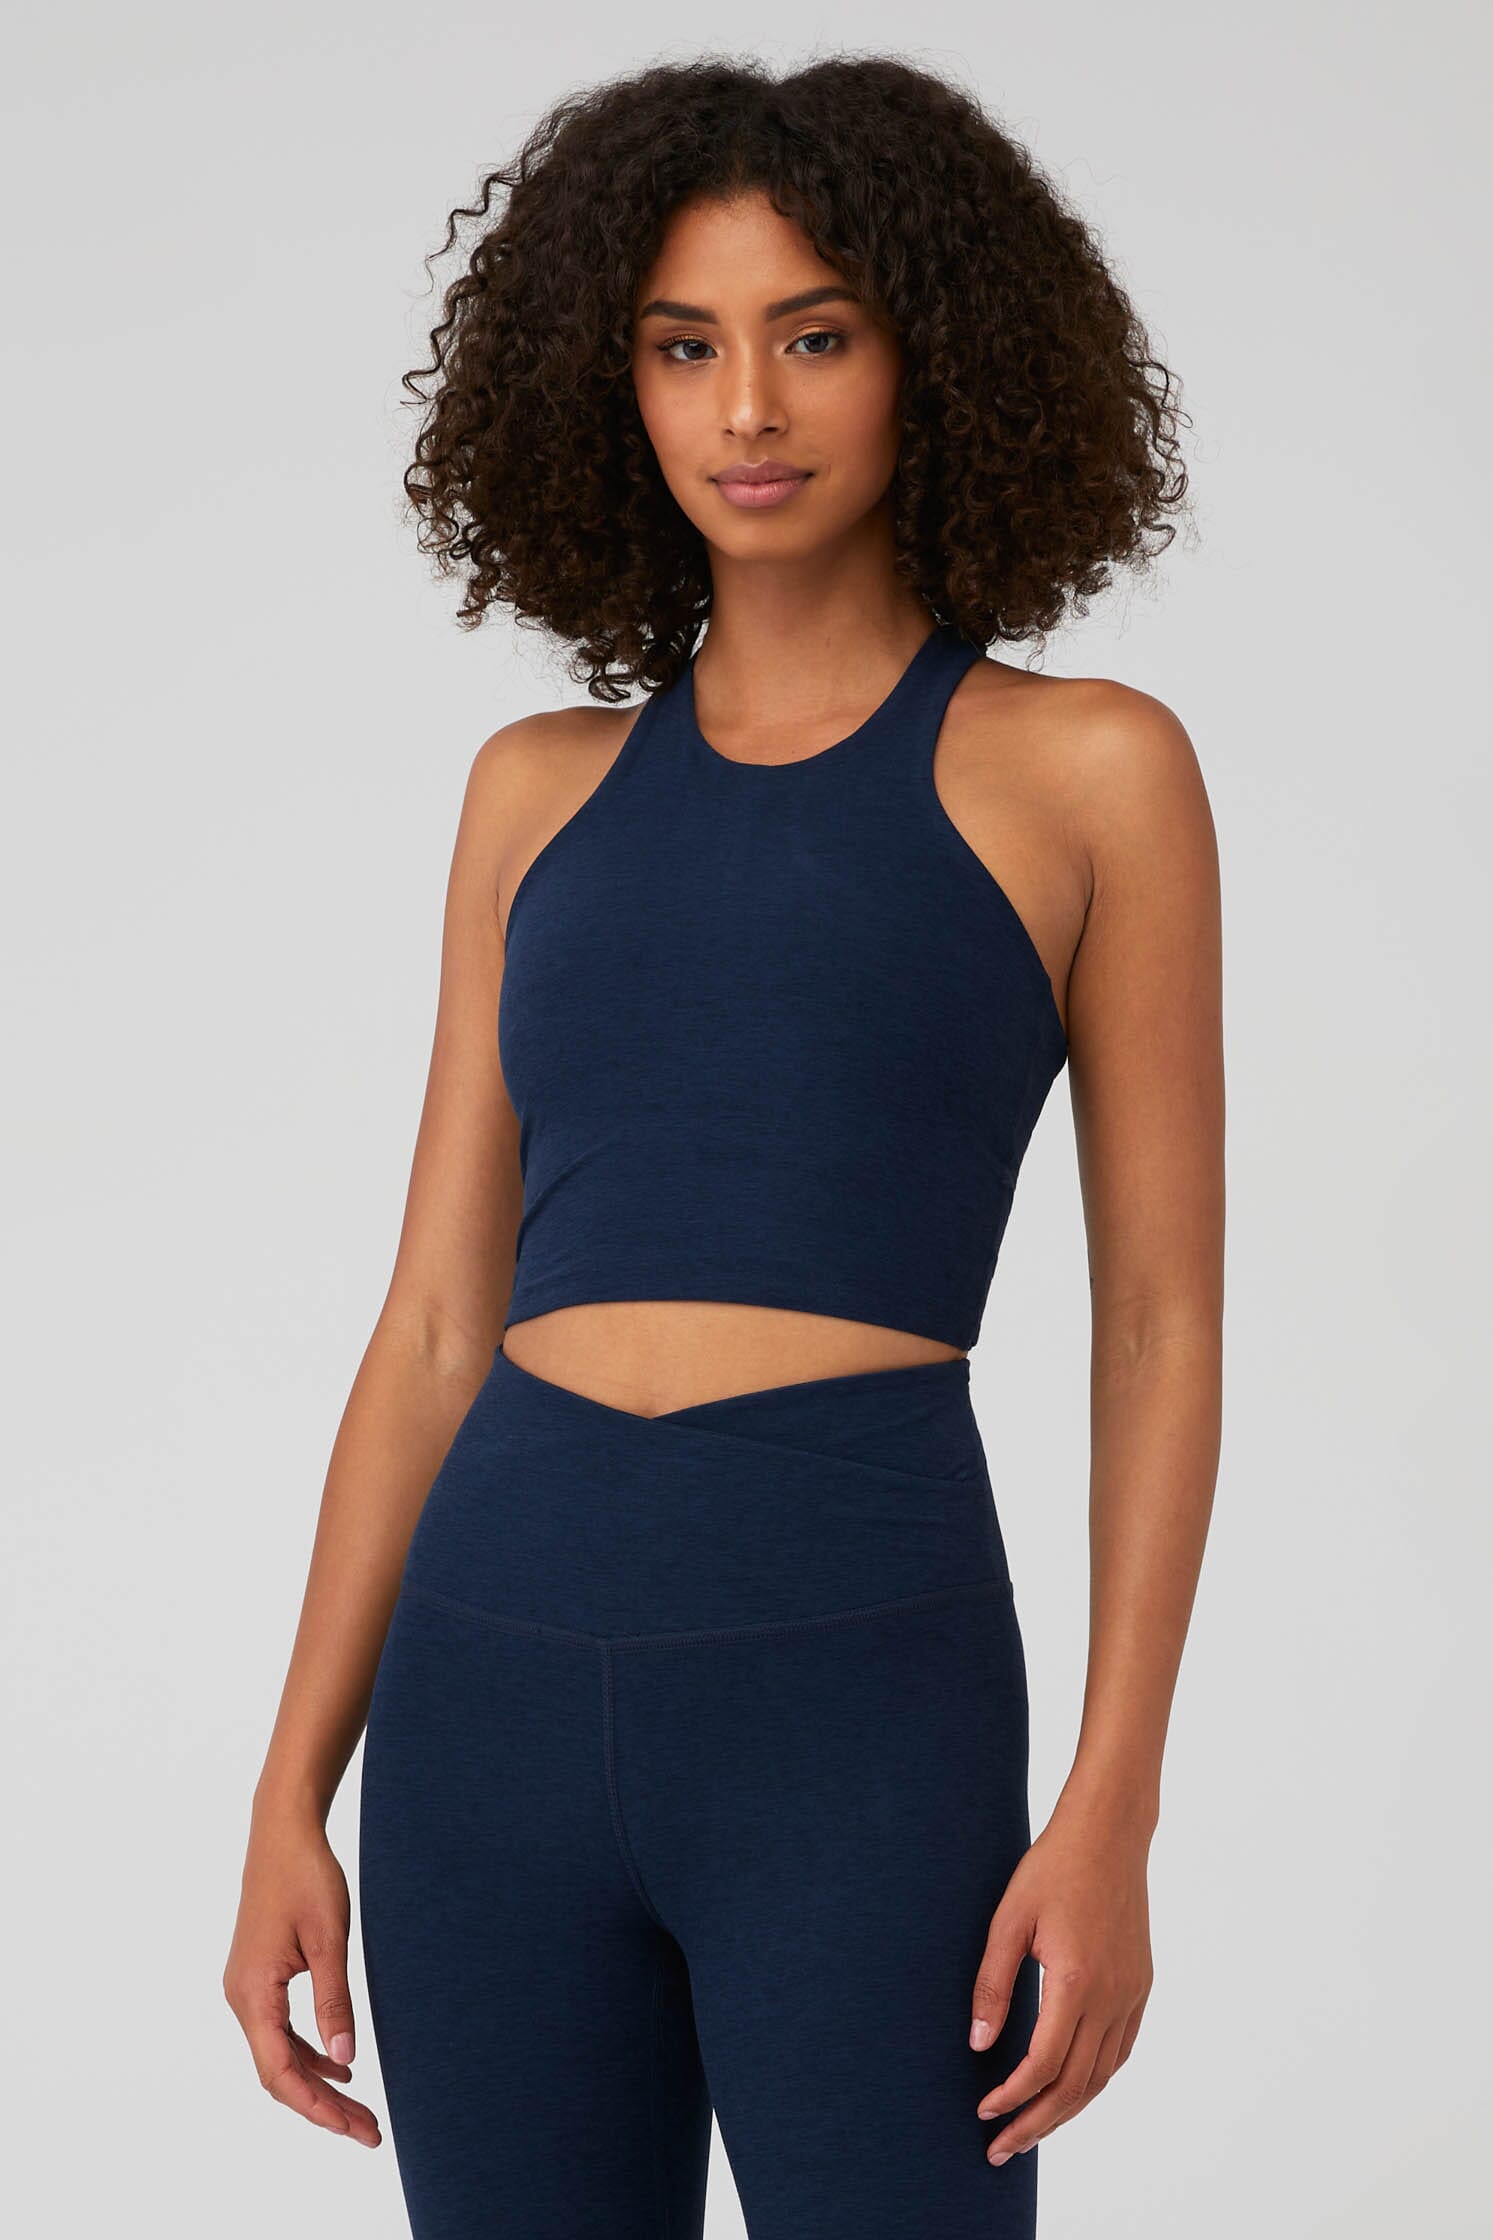 https://images.fashionpass.com/products/spacedye-focus-cropped-tank-beyond-yoga-nocturnal-navy-59e-1.png?profile=a